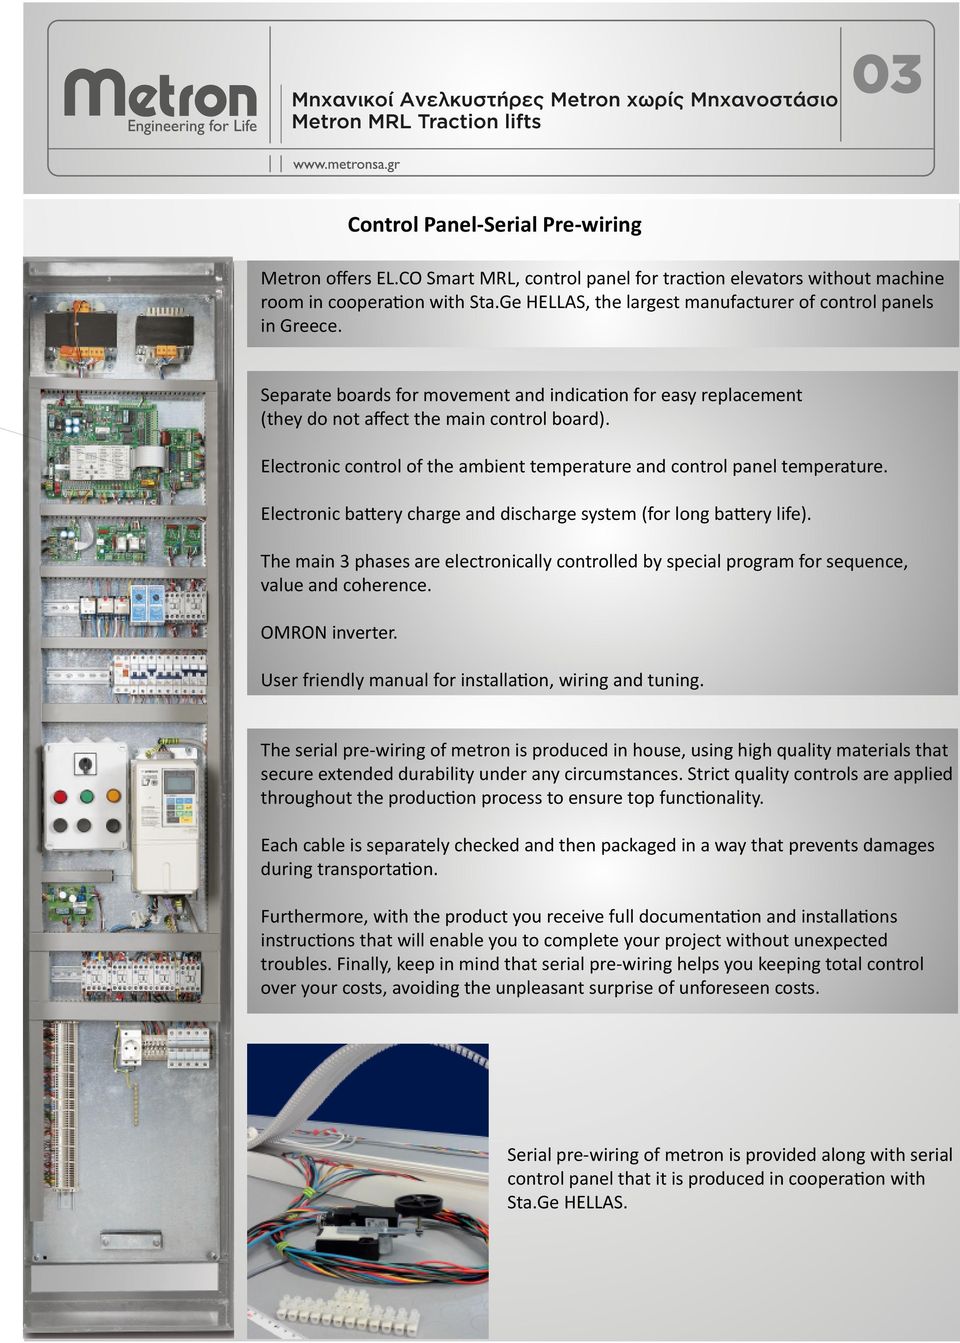 Electronic control of the ambient temperature and control panel temperature. Electronic battery charge and discharge system (for long battery life).